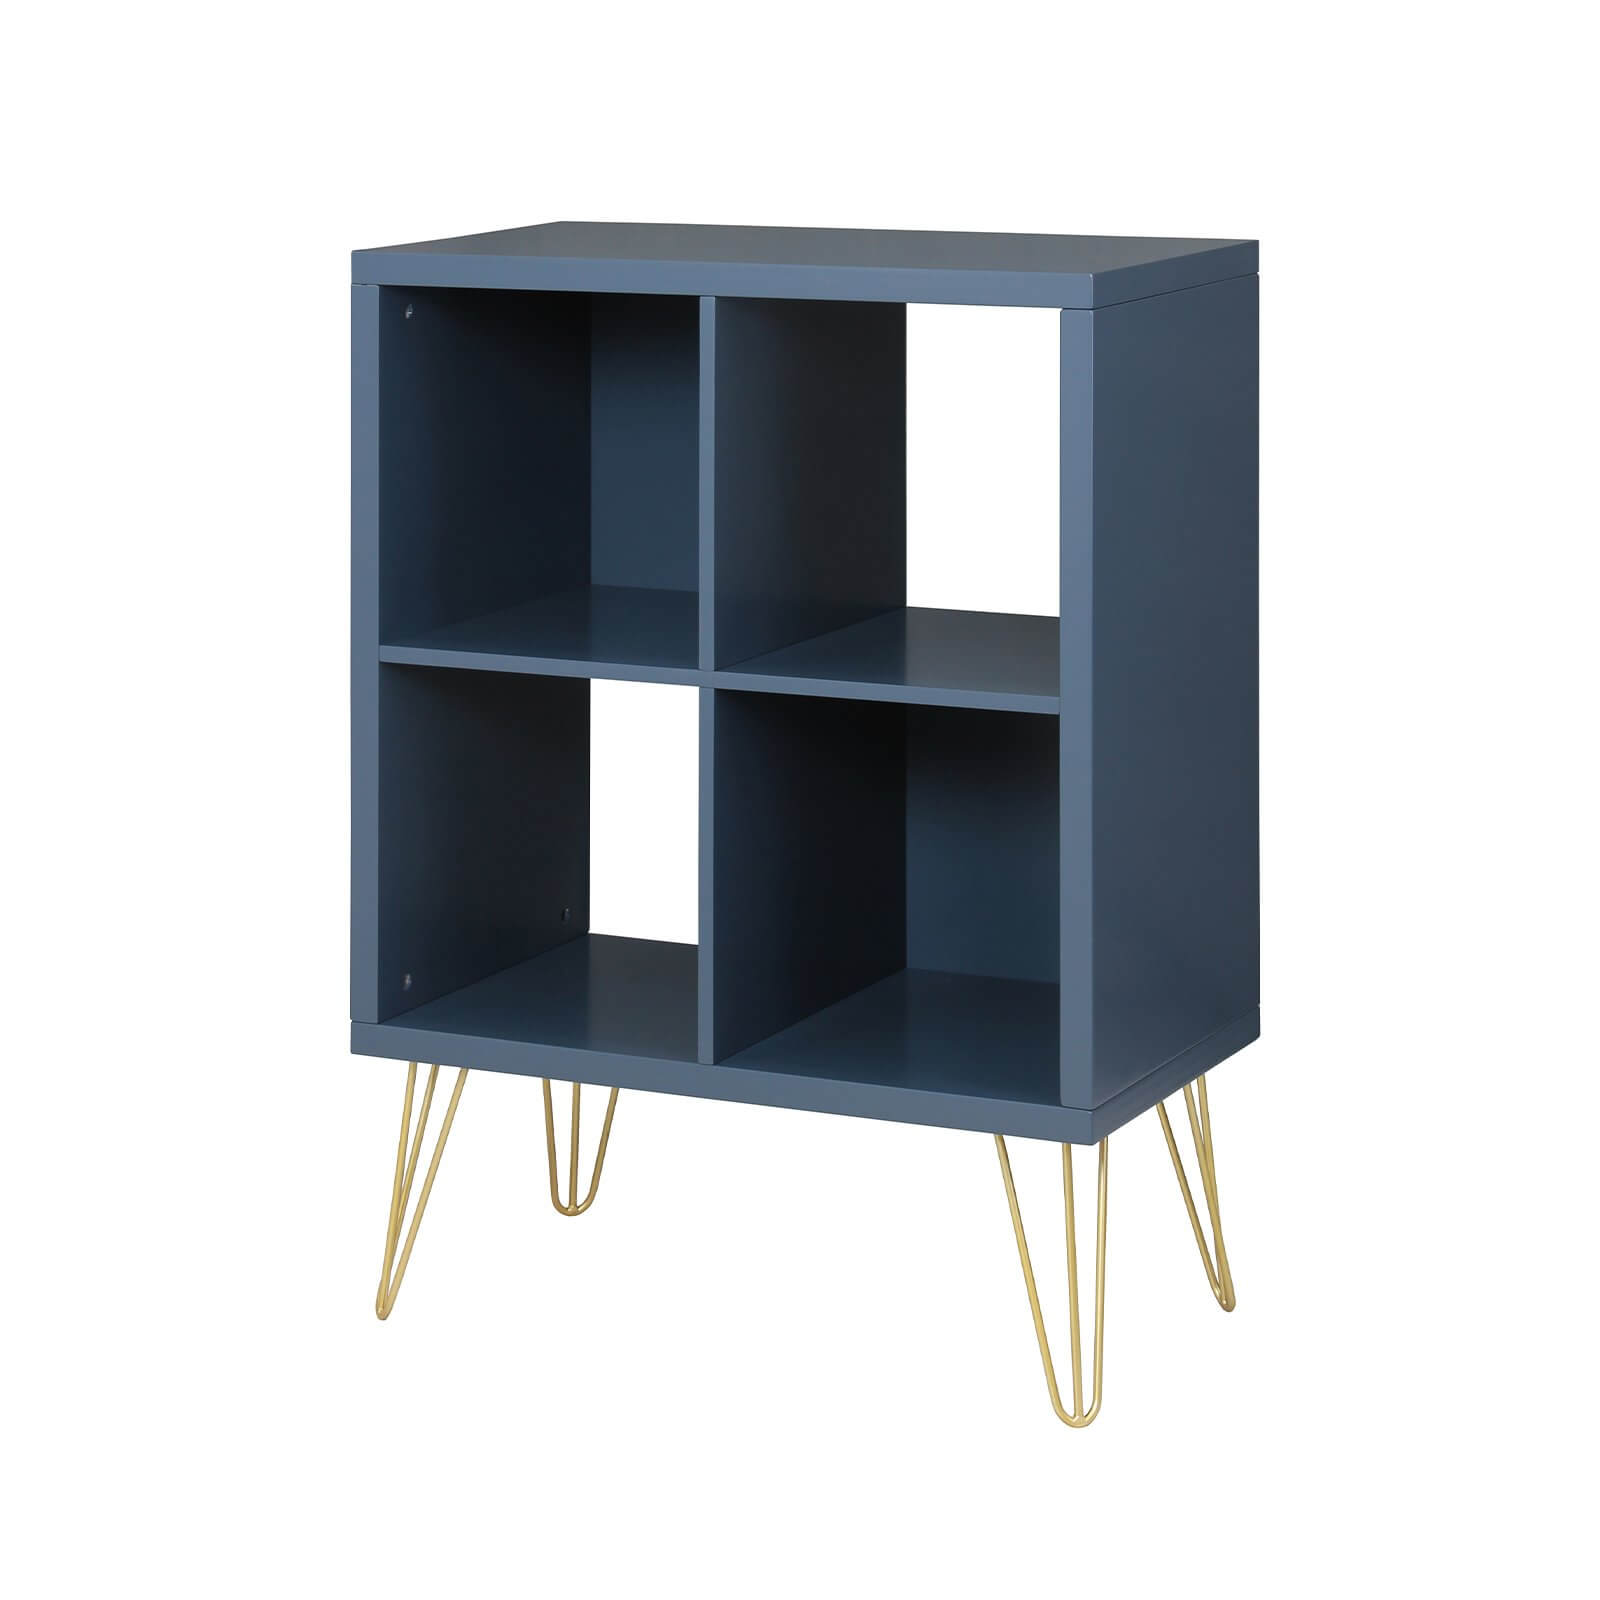 2x2 Cube Storage Unit - Orion Blue with Gold Metal Legs